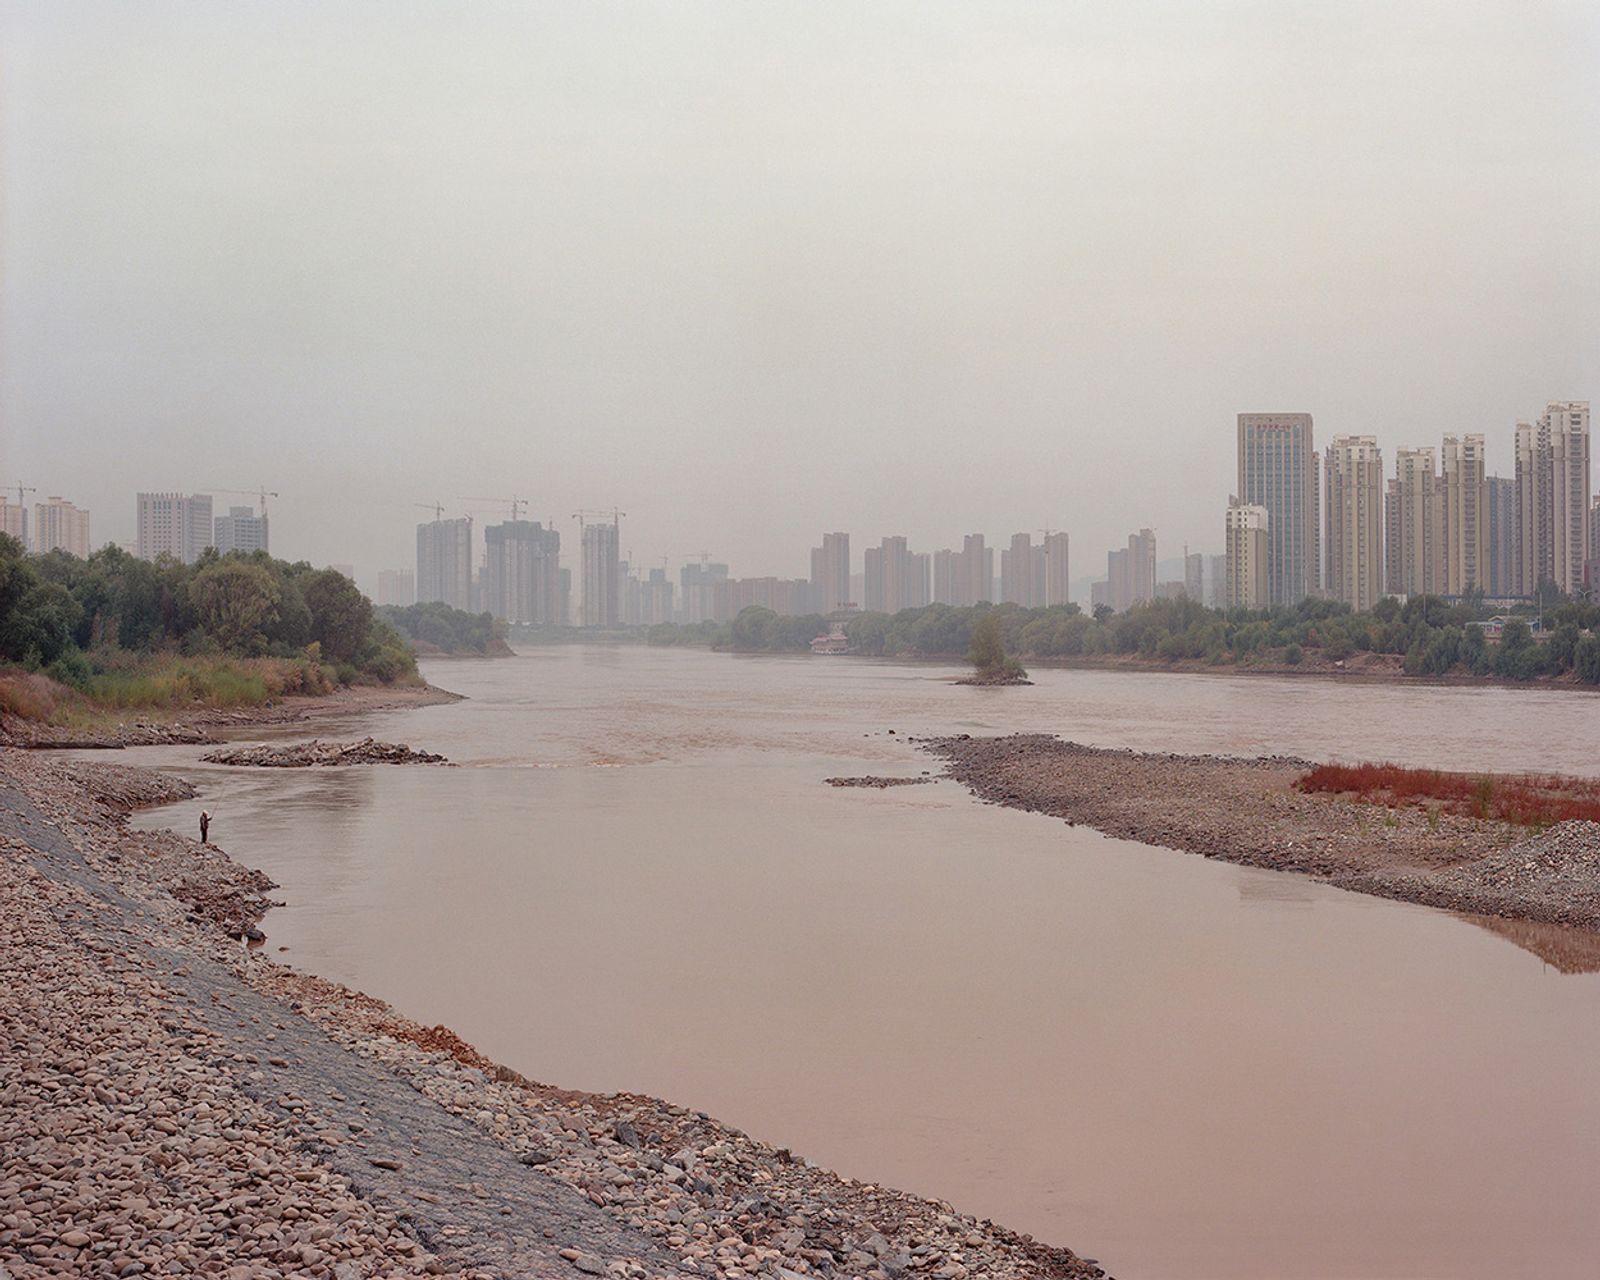 © Sebastien Tixier - Image from the SHAN SHUI photography project